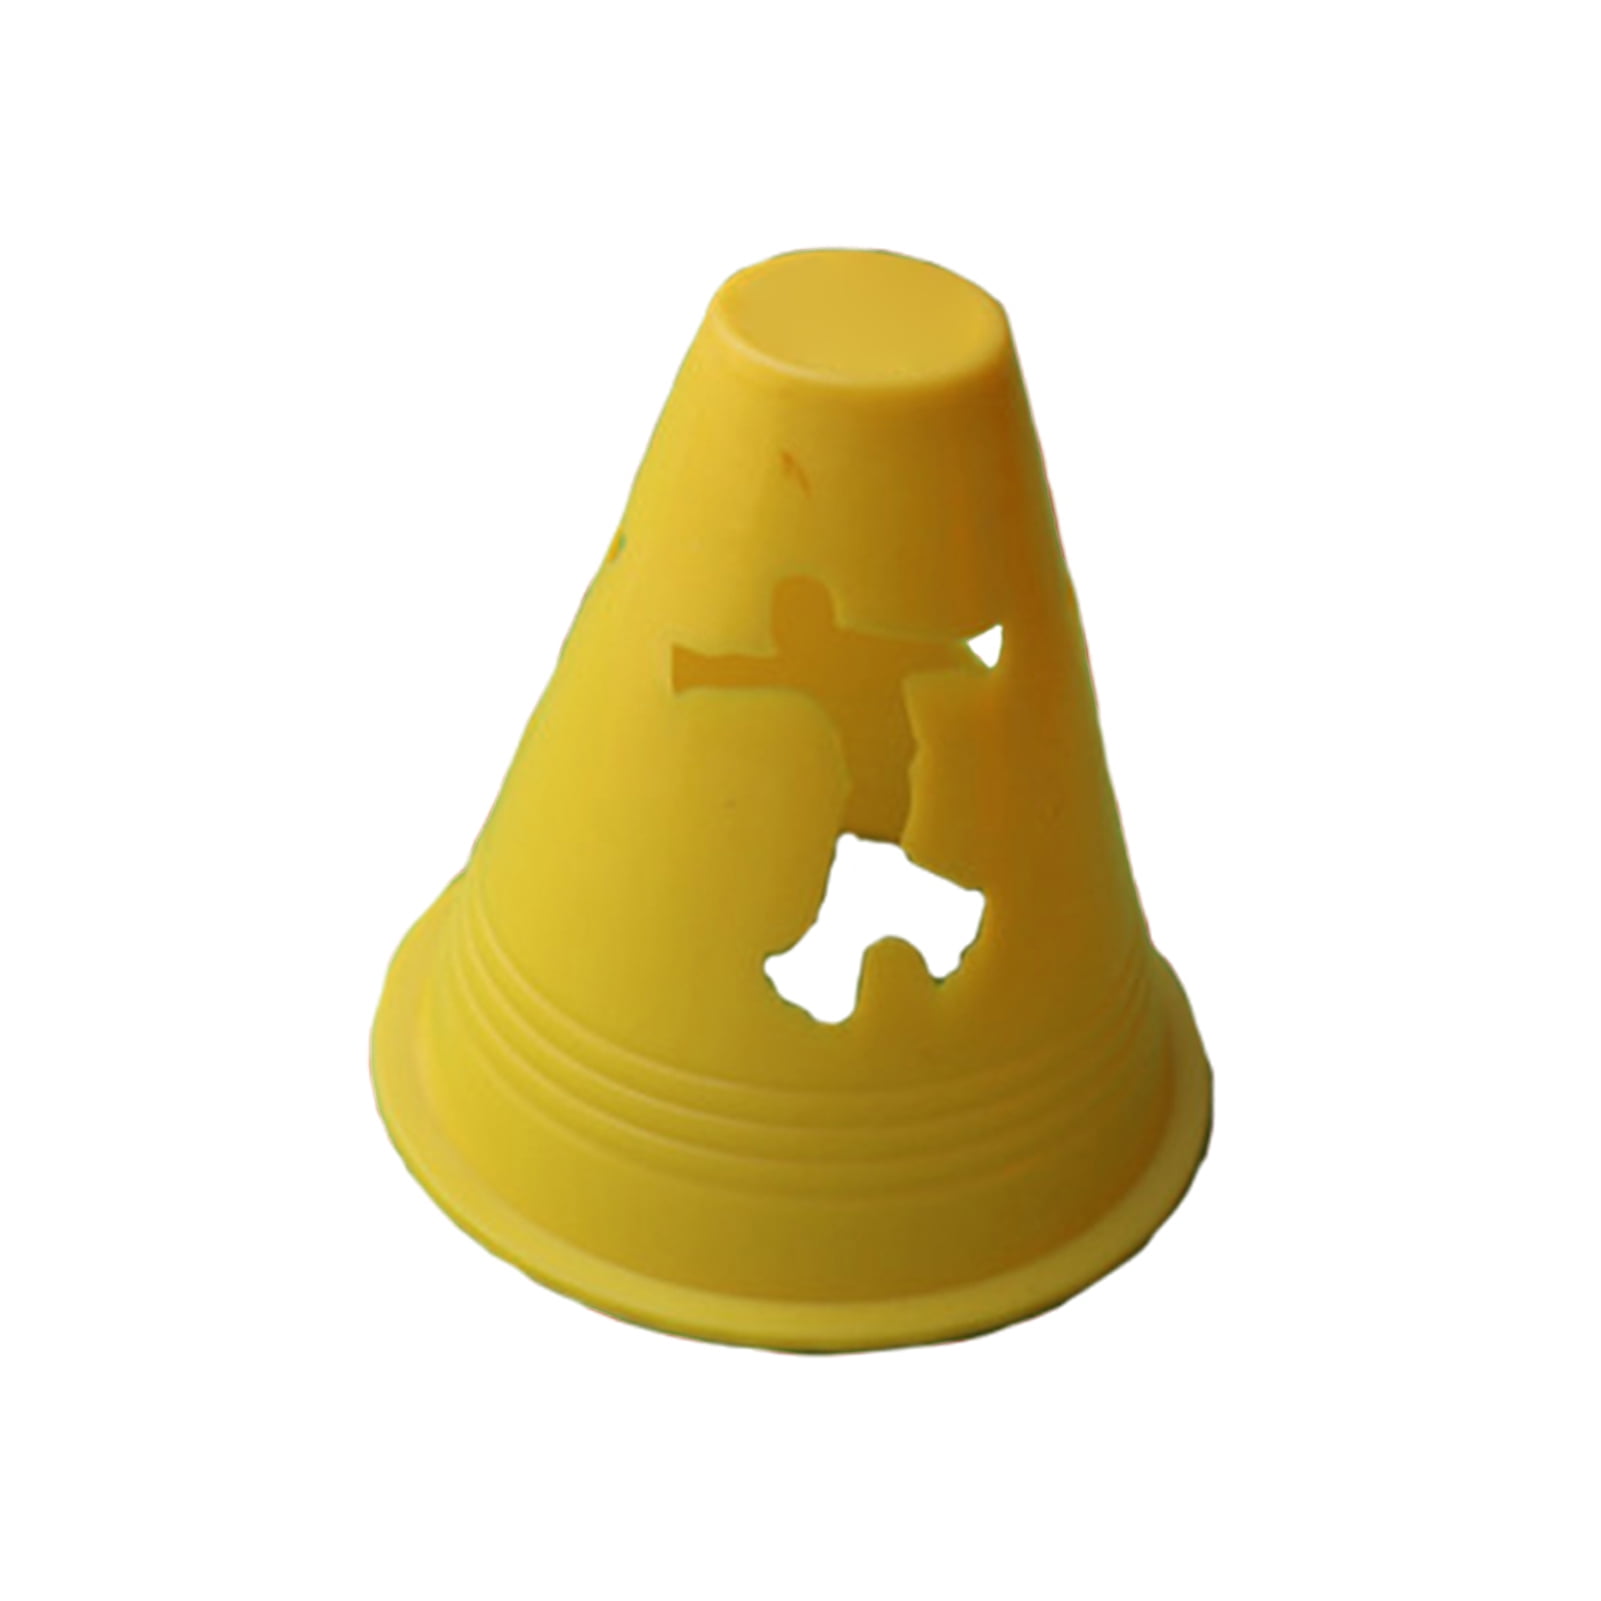 20pcs/pack Marking Cone Free Slalom Football Training Skate Pile Cup Sport 